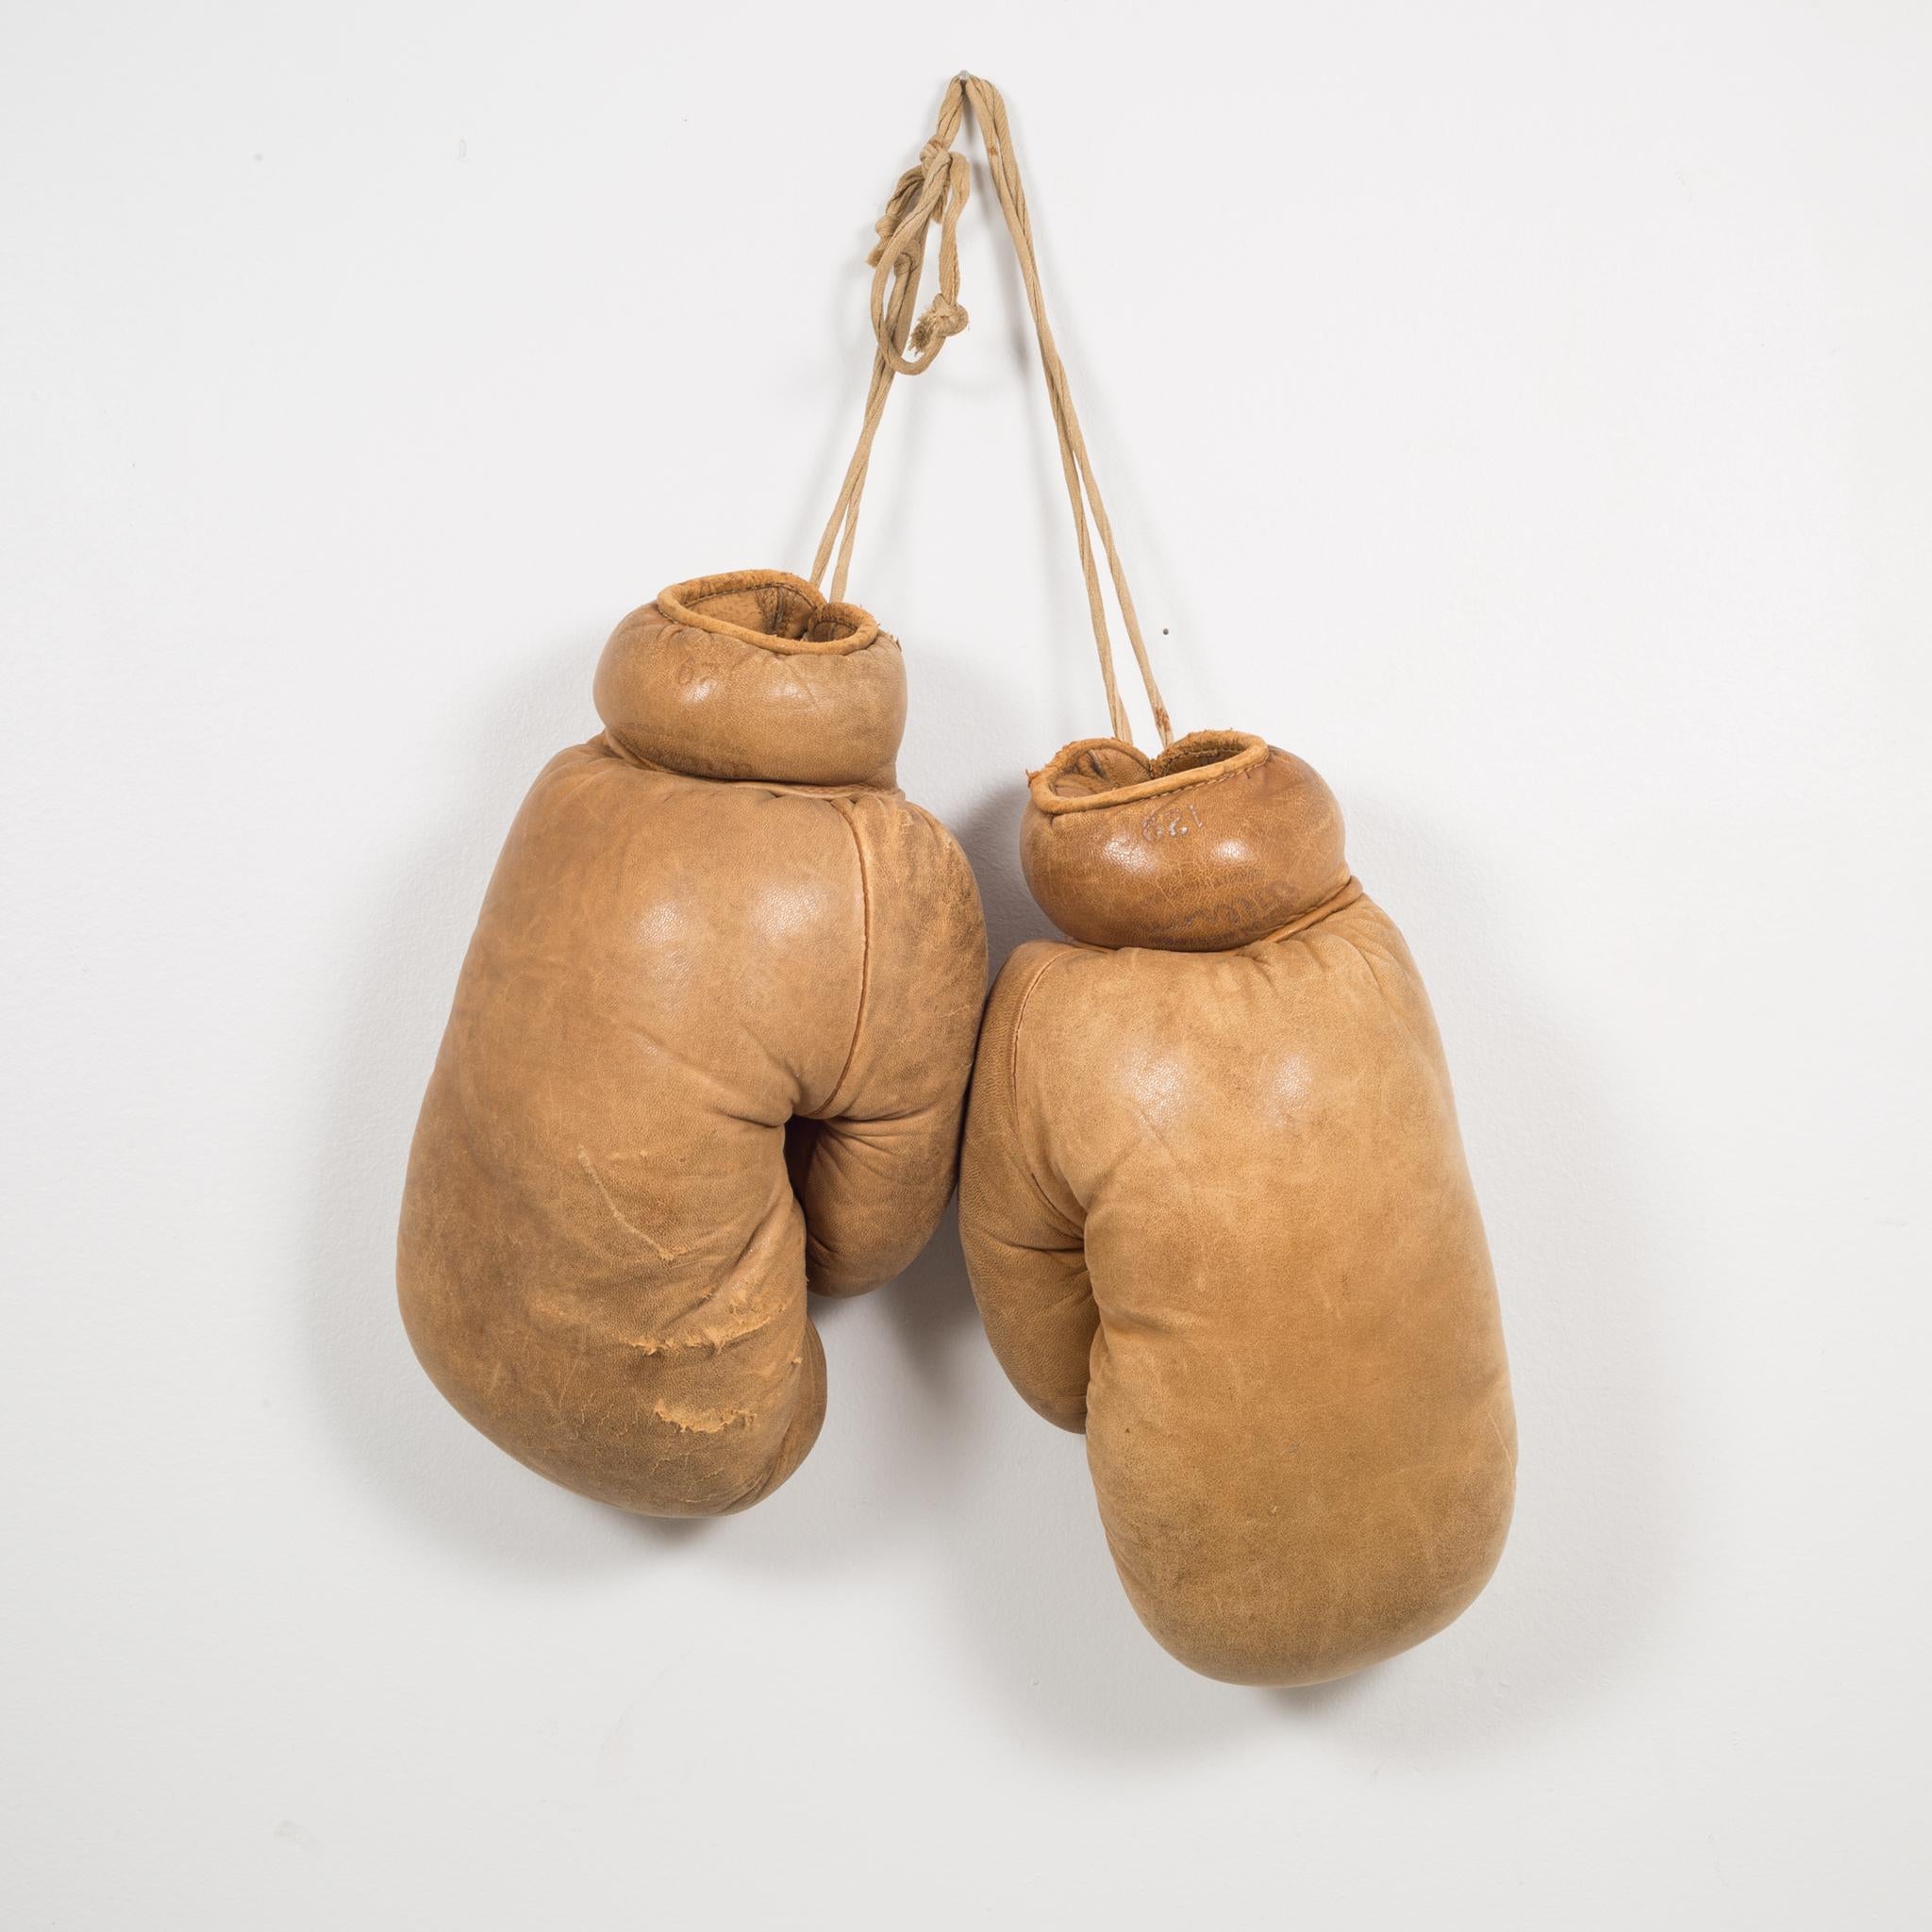 About

This is a original pair of Wilson leather boxing gloves. The boxing gloves are brown leather with brown leather piping. 